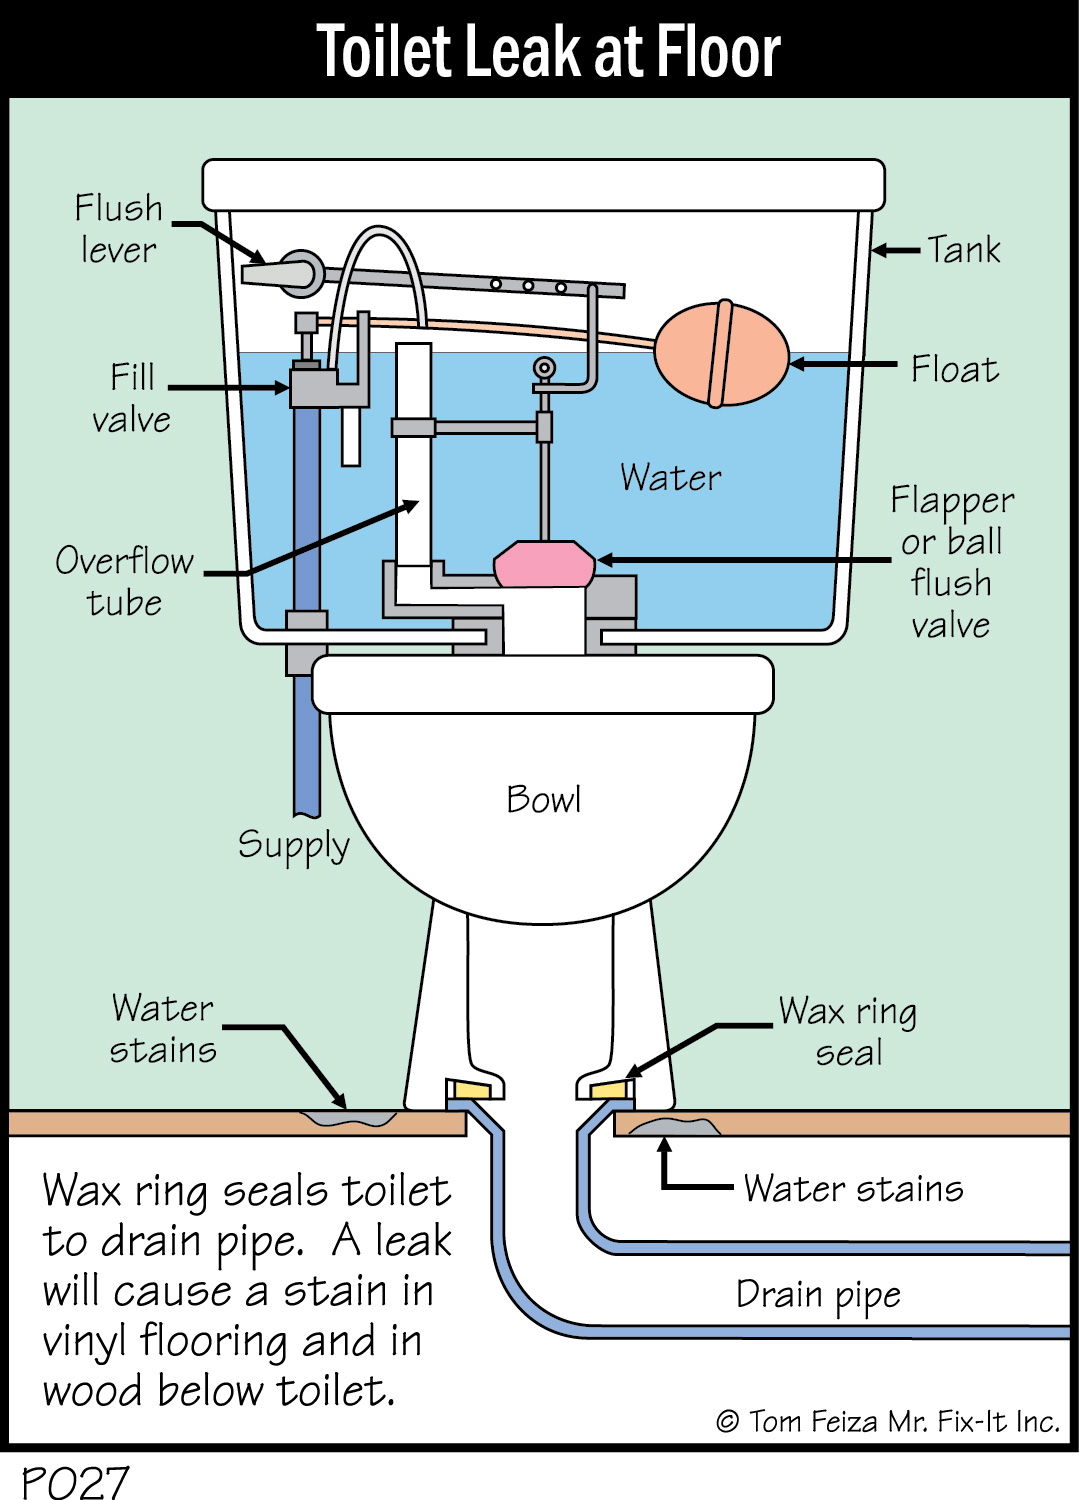 Quick Tip #5 - Stains Around a Toilet = Serious Problem